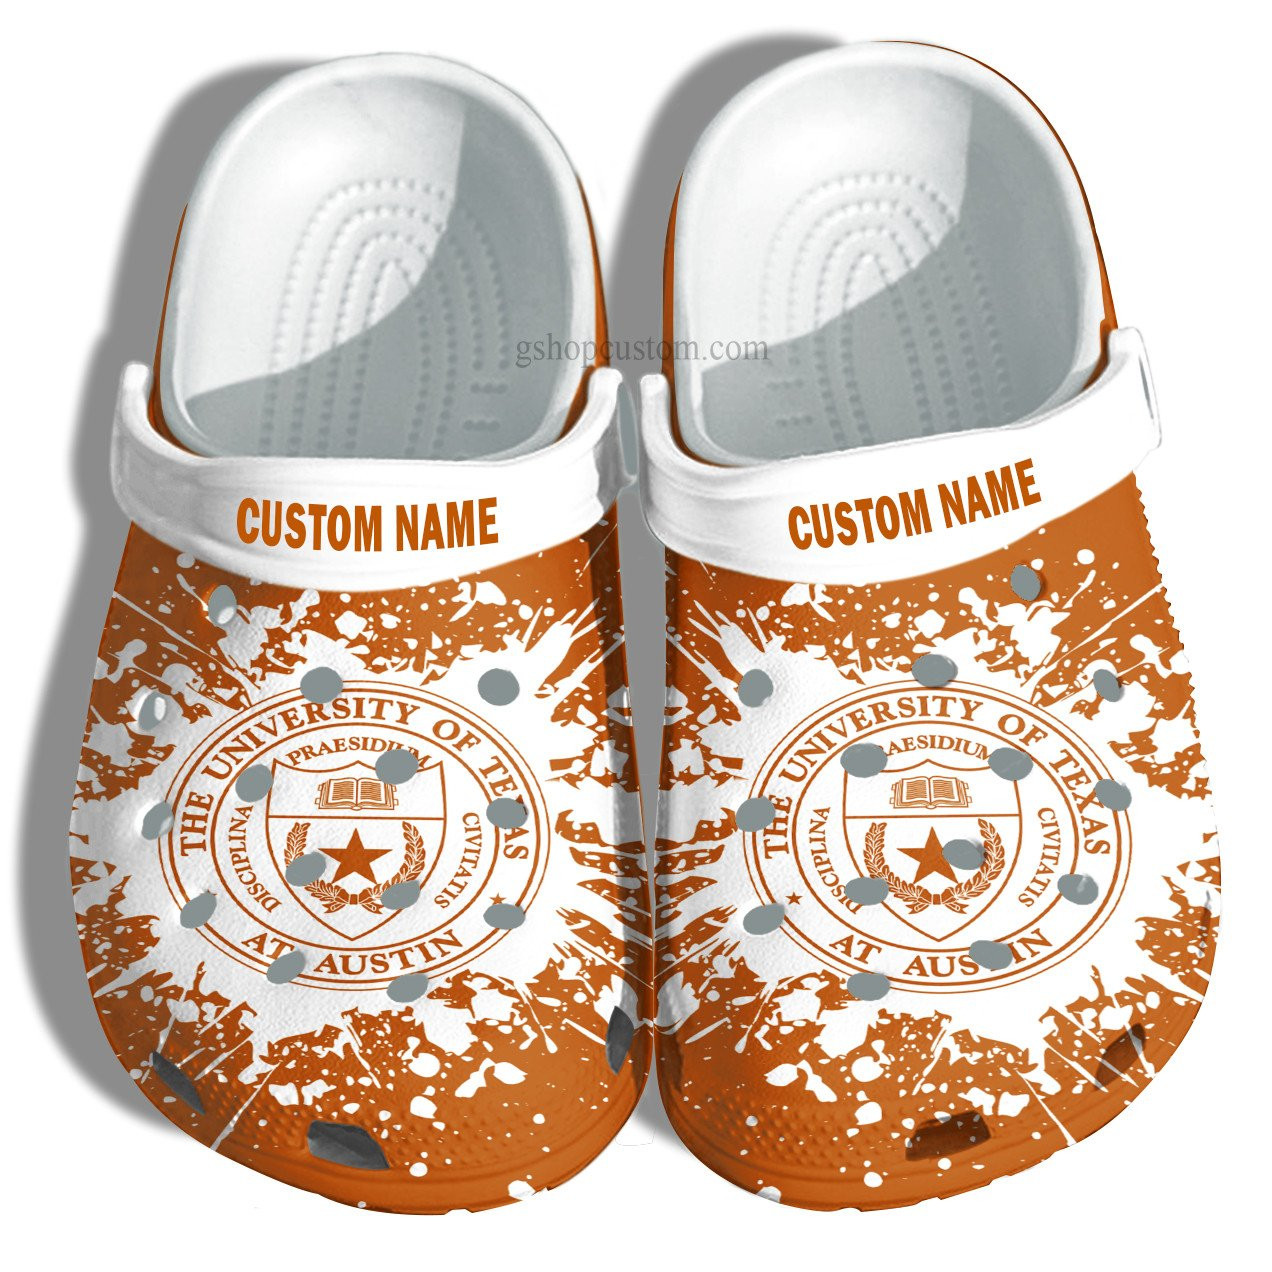 The University Of Texas Croc Shoes Customize- University Graduation Gifts Crocs Shoes Admission Gift